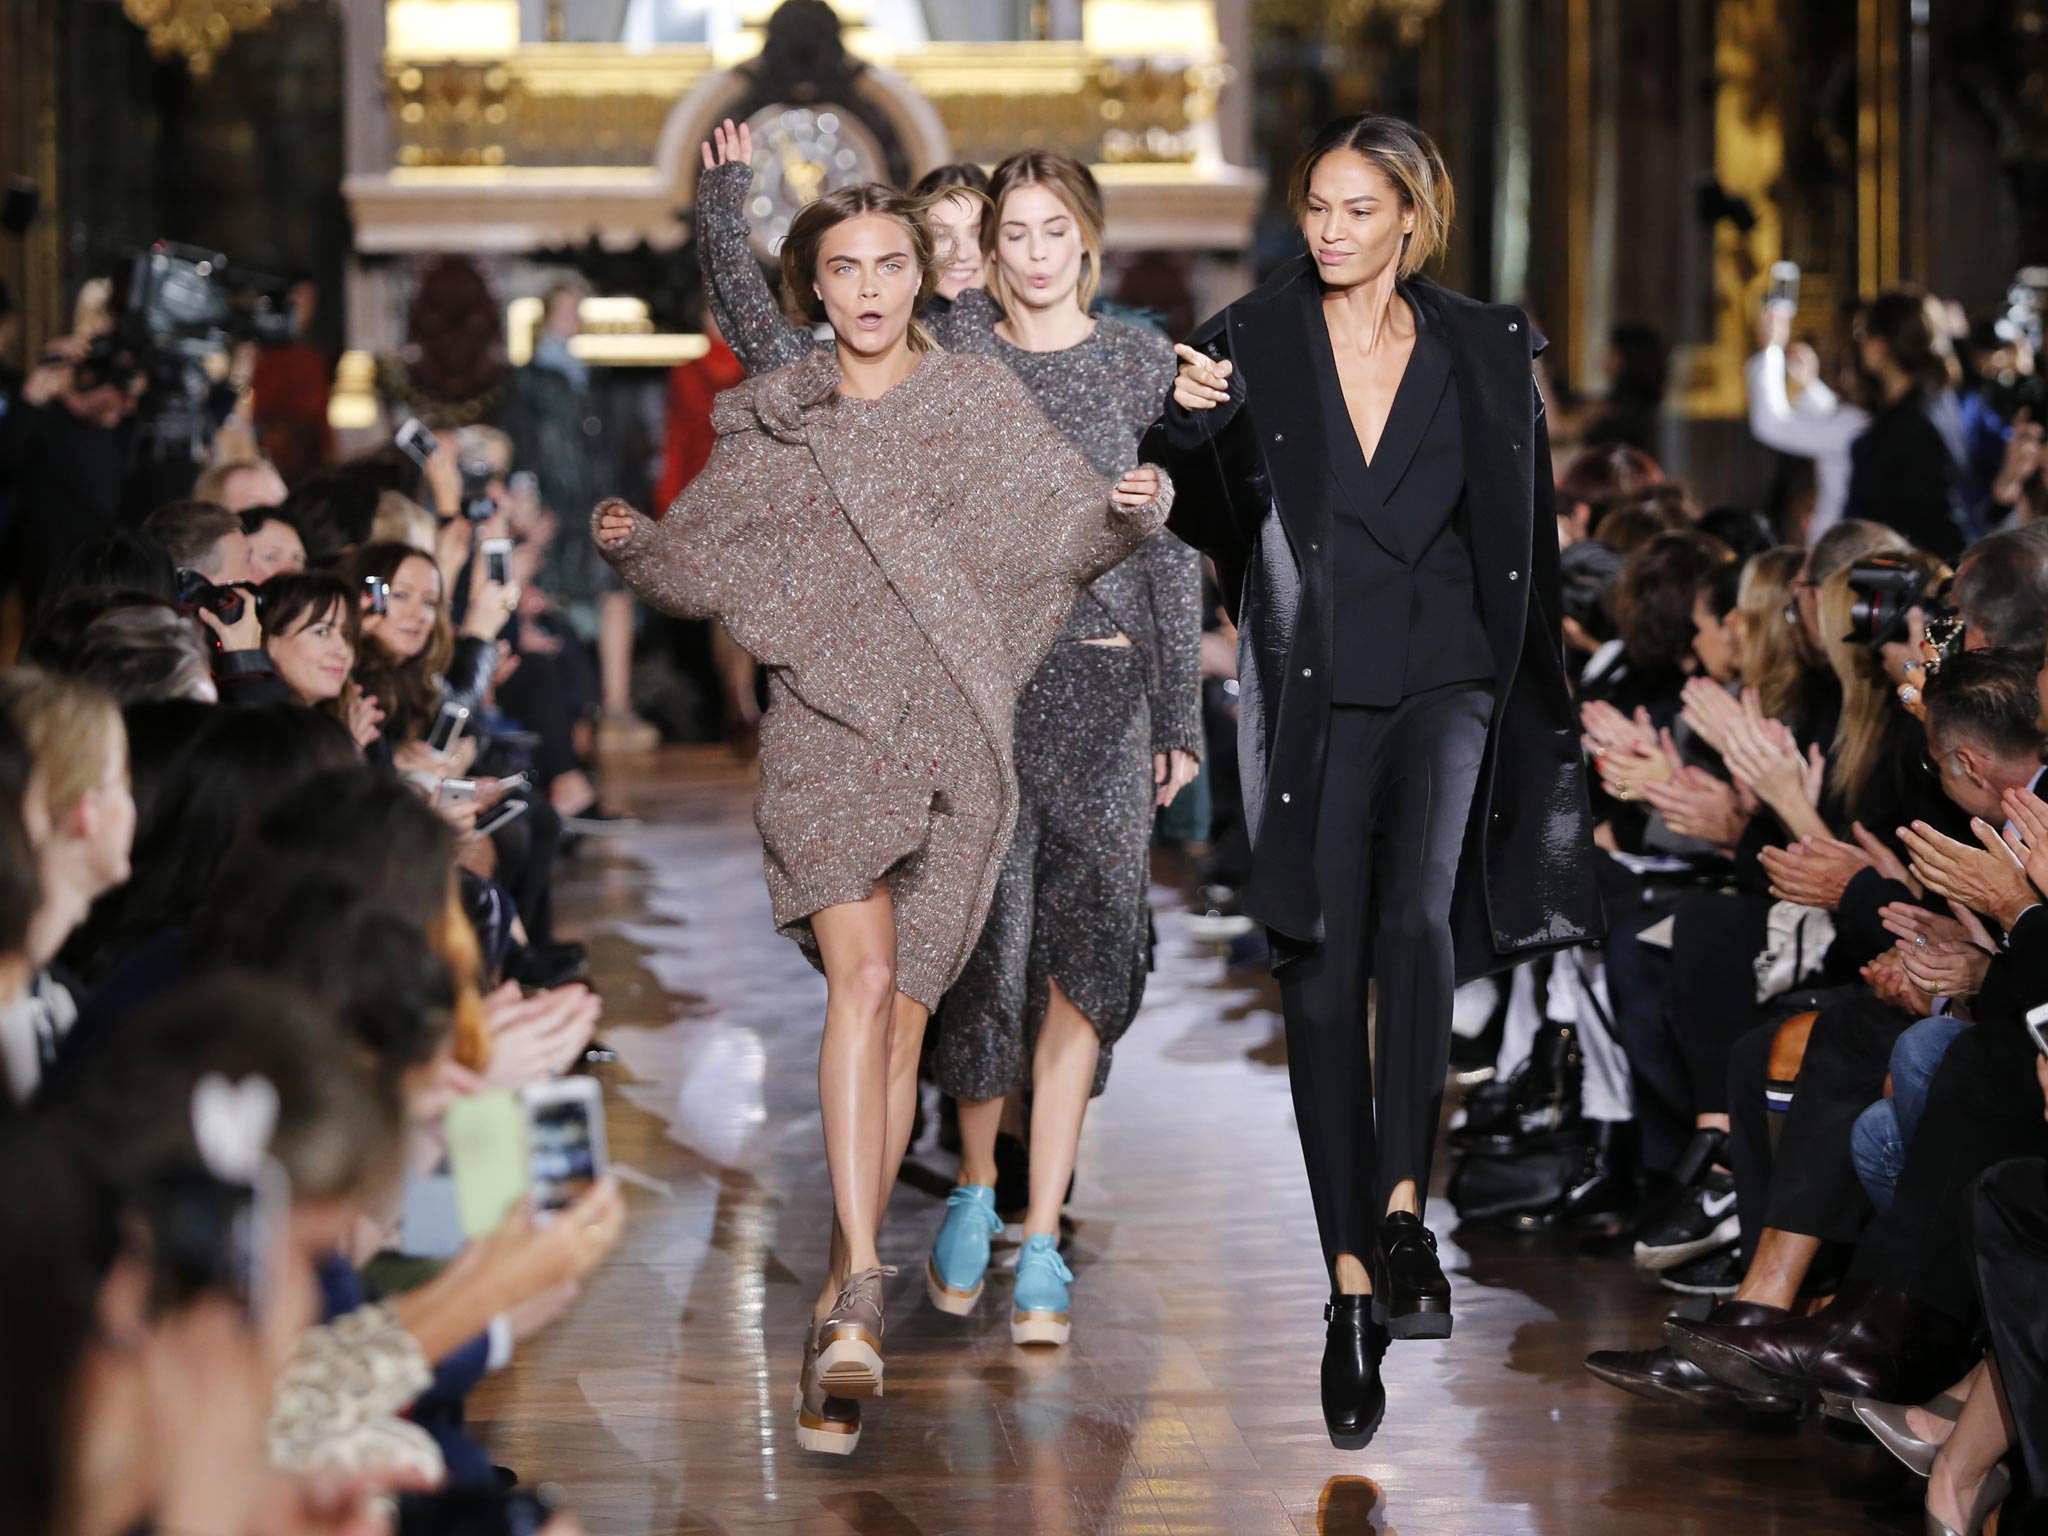 Models Cara Delevingne, left, and Joan Smalls on the runway during Stella McCartney’s ready-to-wear collection